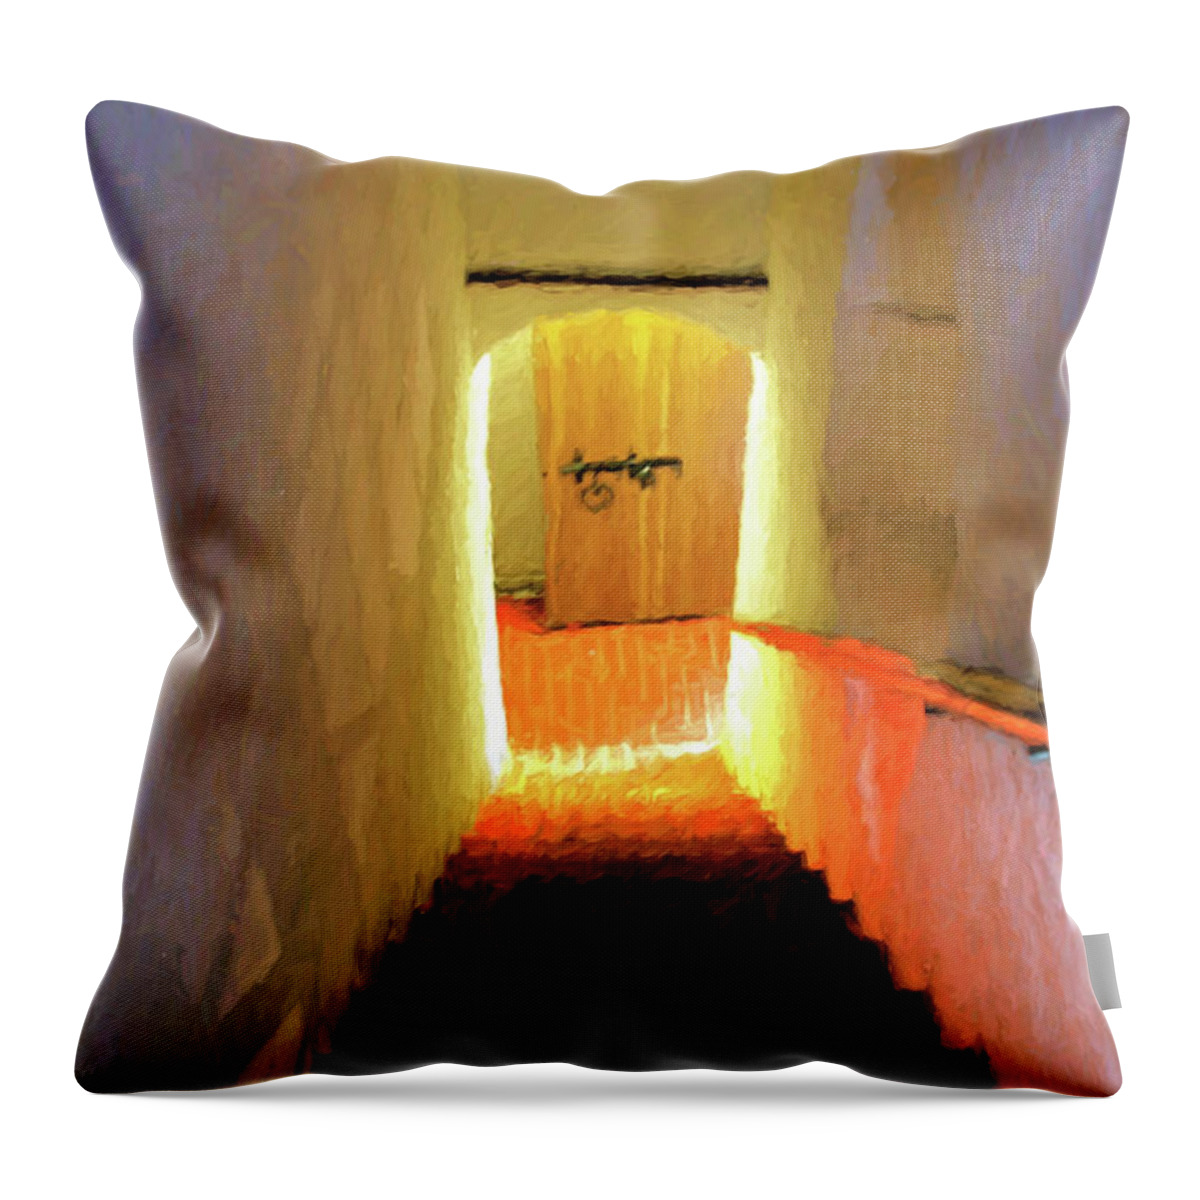 Window Throw Pillow featuring the digital art Stairway - 2 by OLena Art by Lena Owens - Vibrant DESIGN